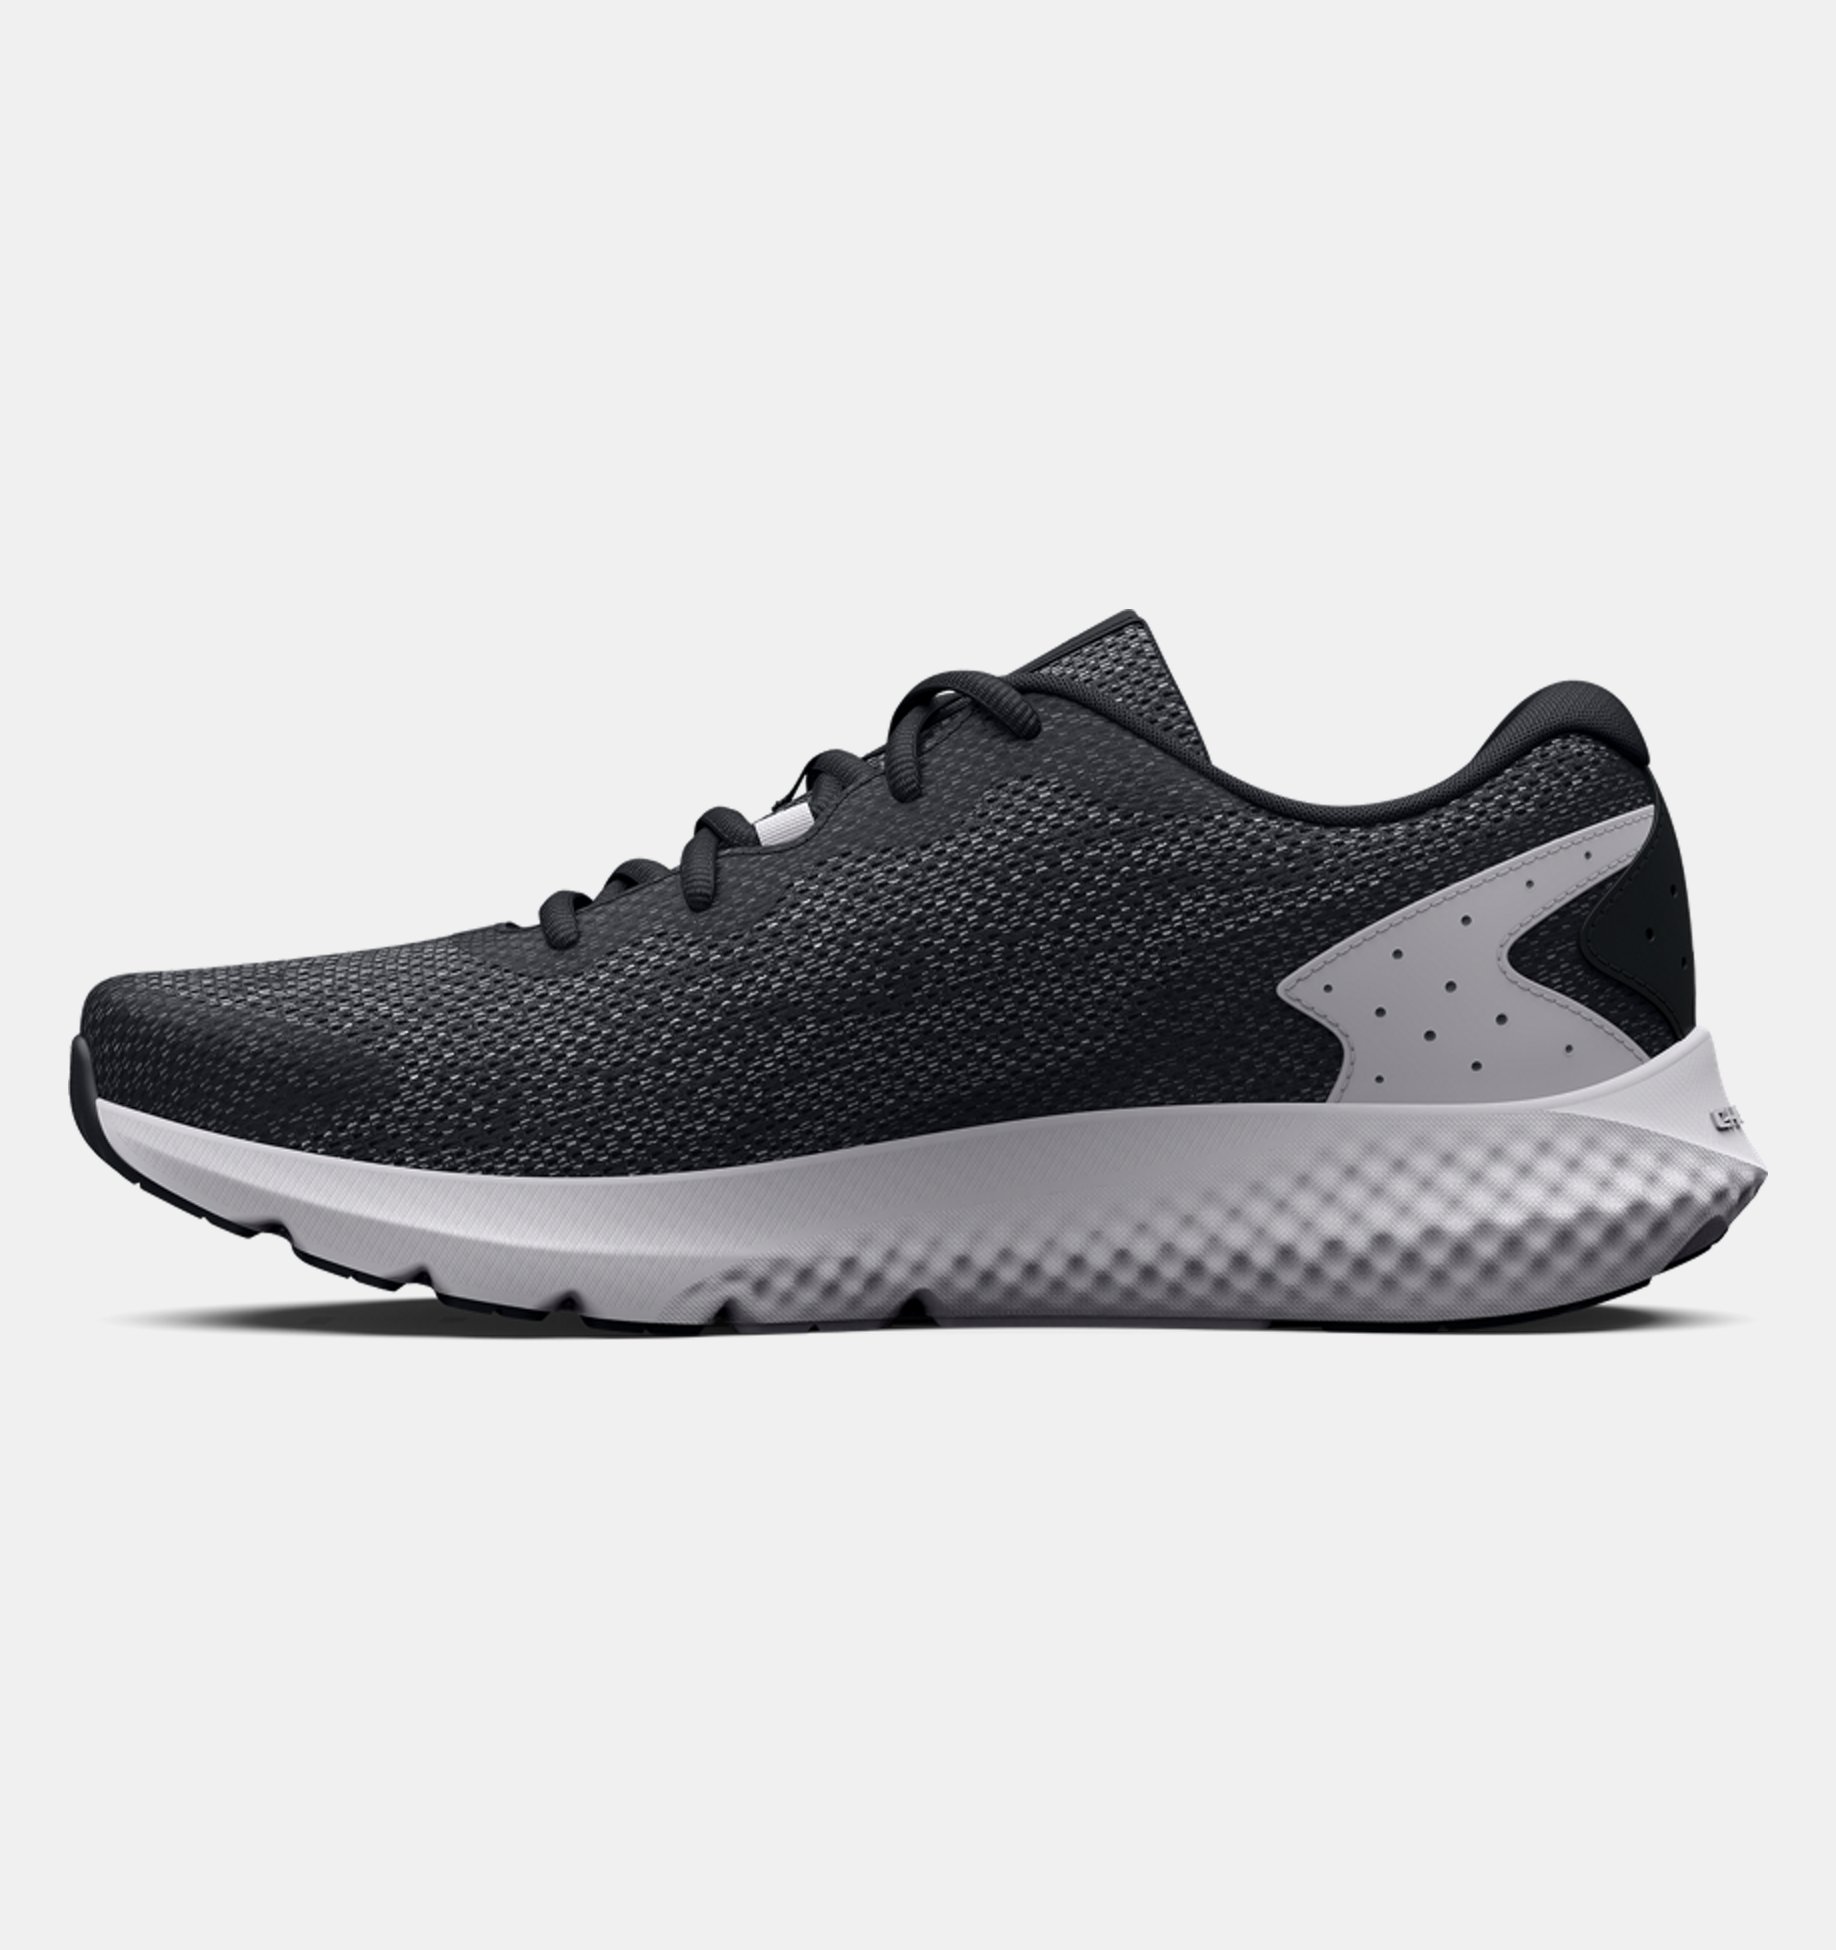 UNDER ARMOUR Charged Rogue 3 Knit - Herren